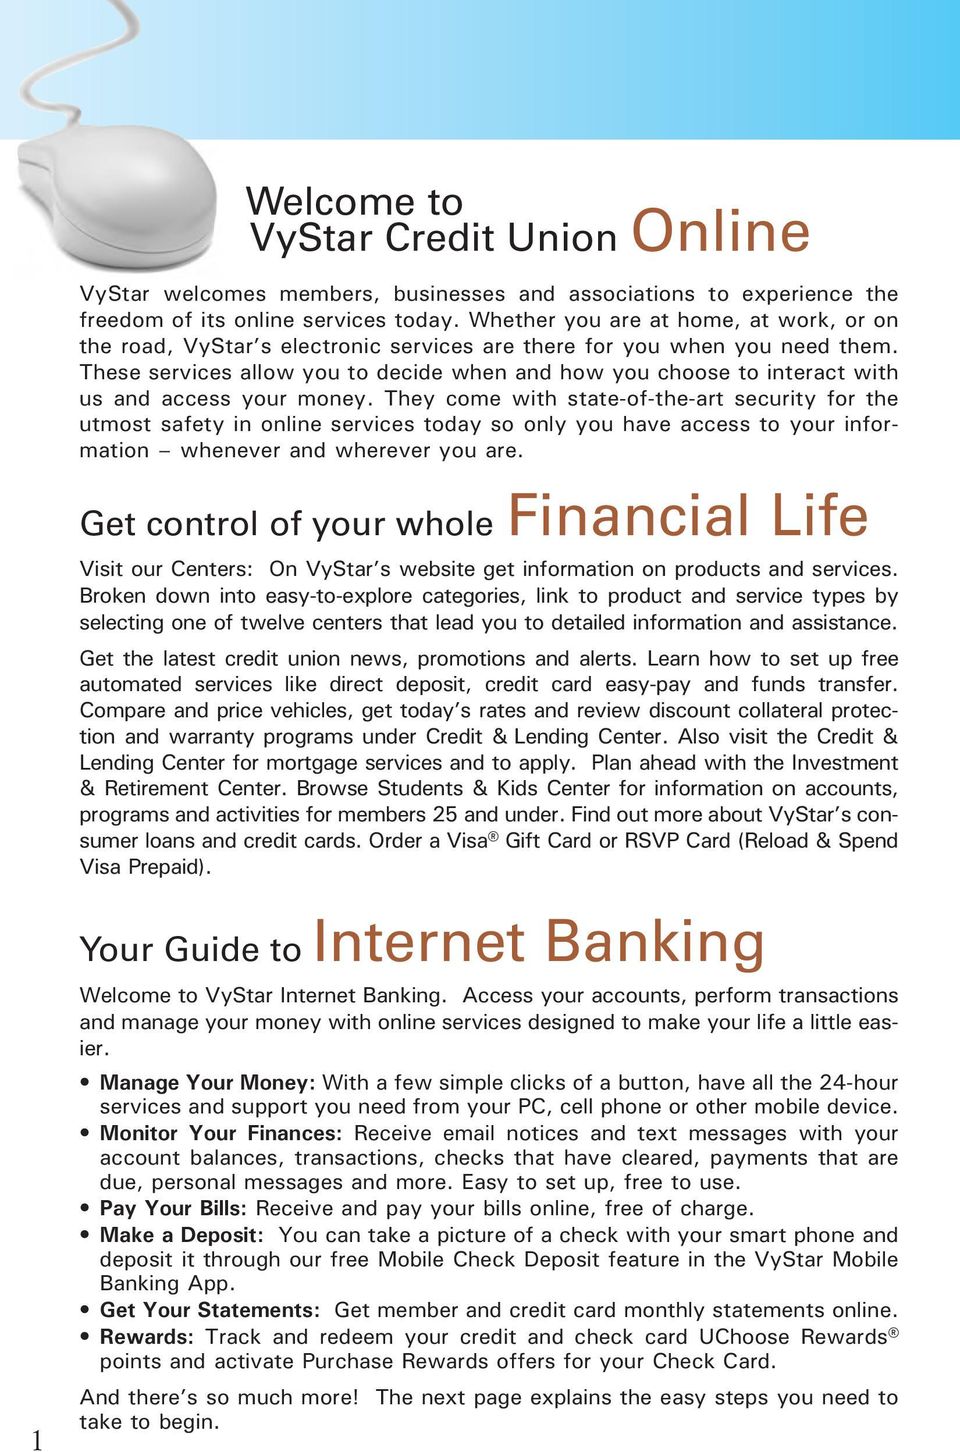 These services allow you to decide when and how you choose to interact with us and access your money.